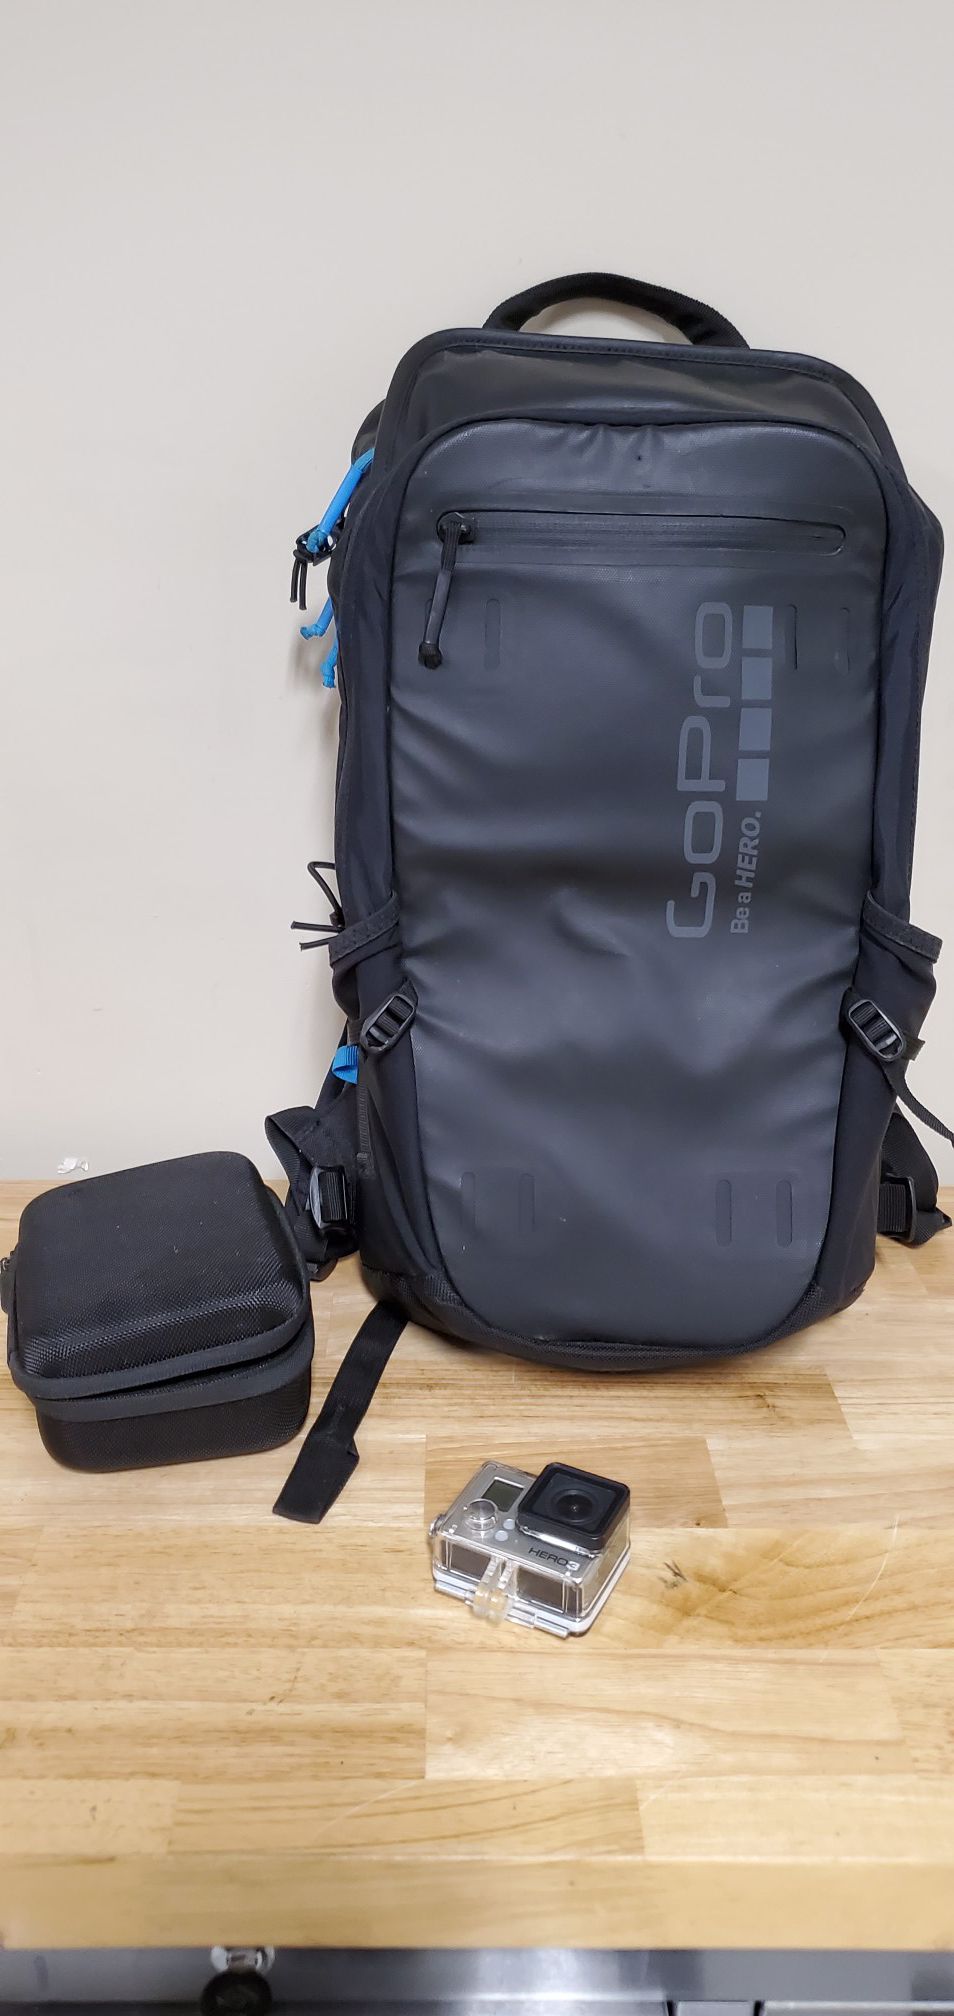 Gopro hero 3 w backpack .. great condition!!